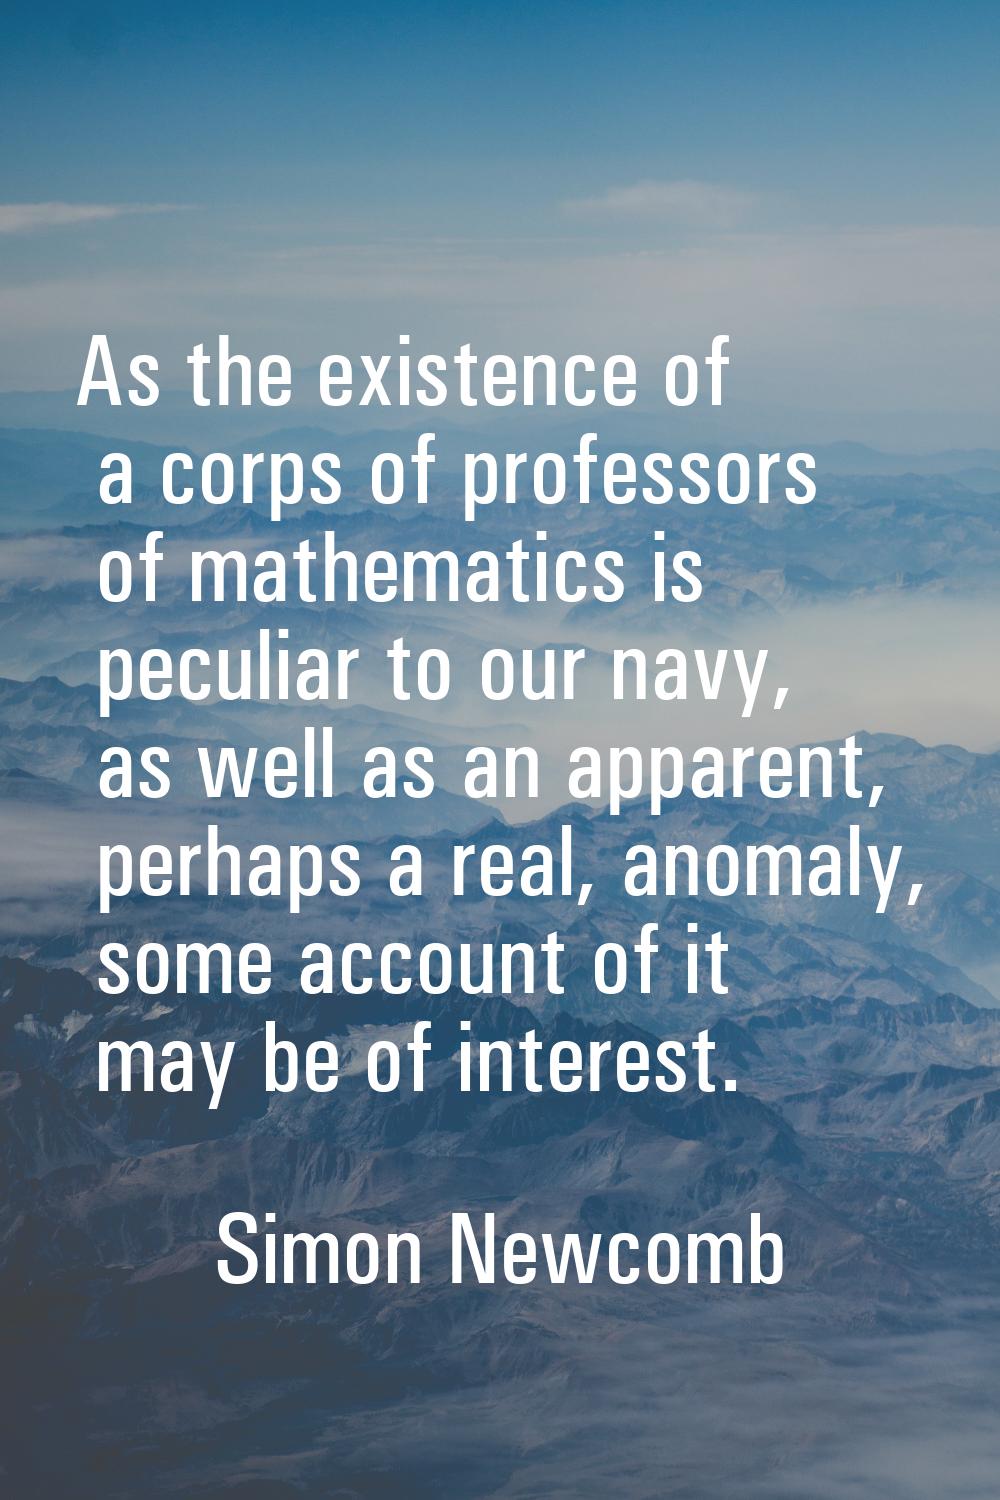 As the existence of a corps of professors of mathematics is peculiar to our navy, as well as an app